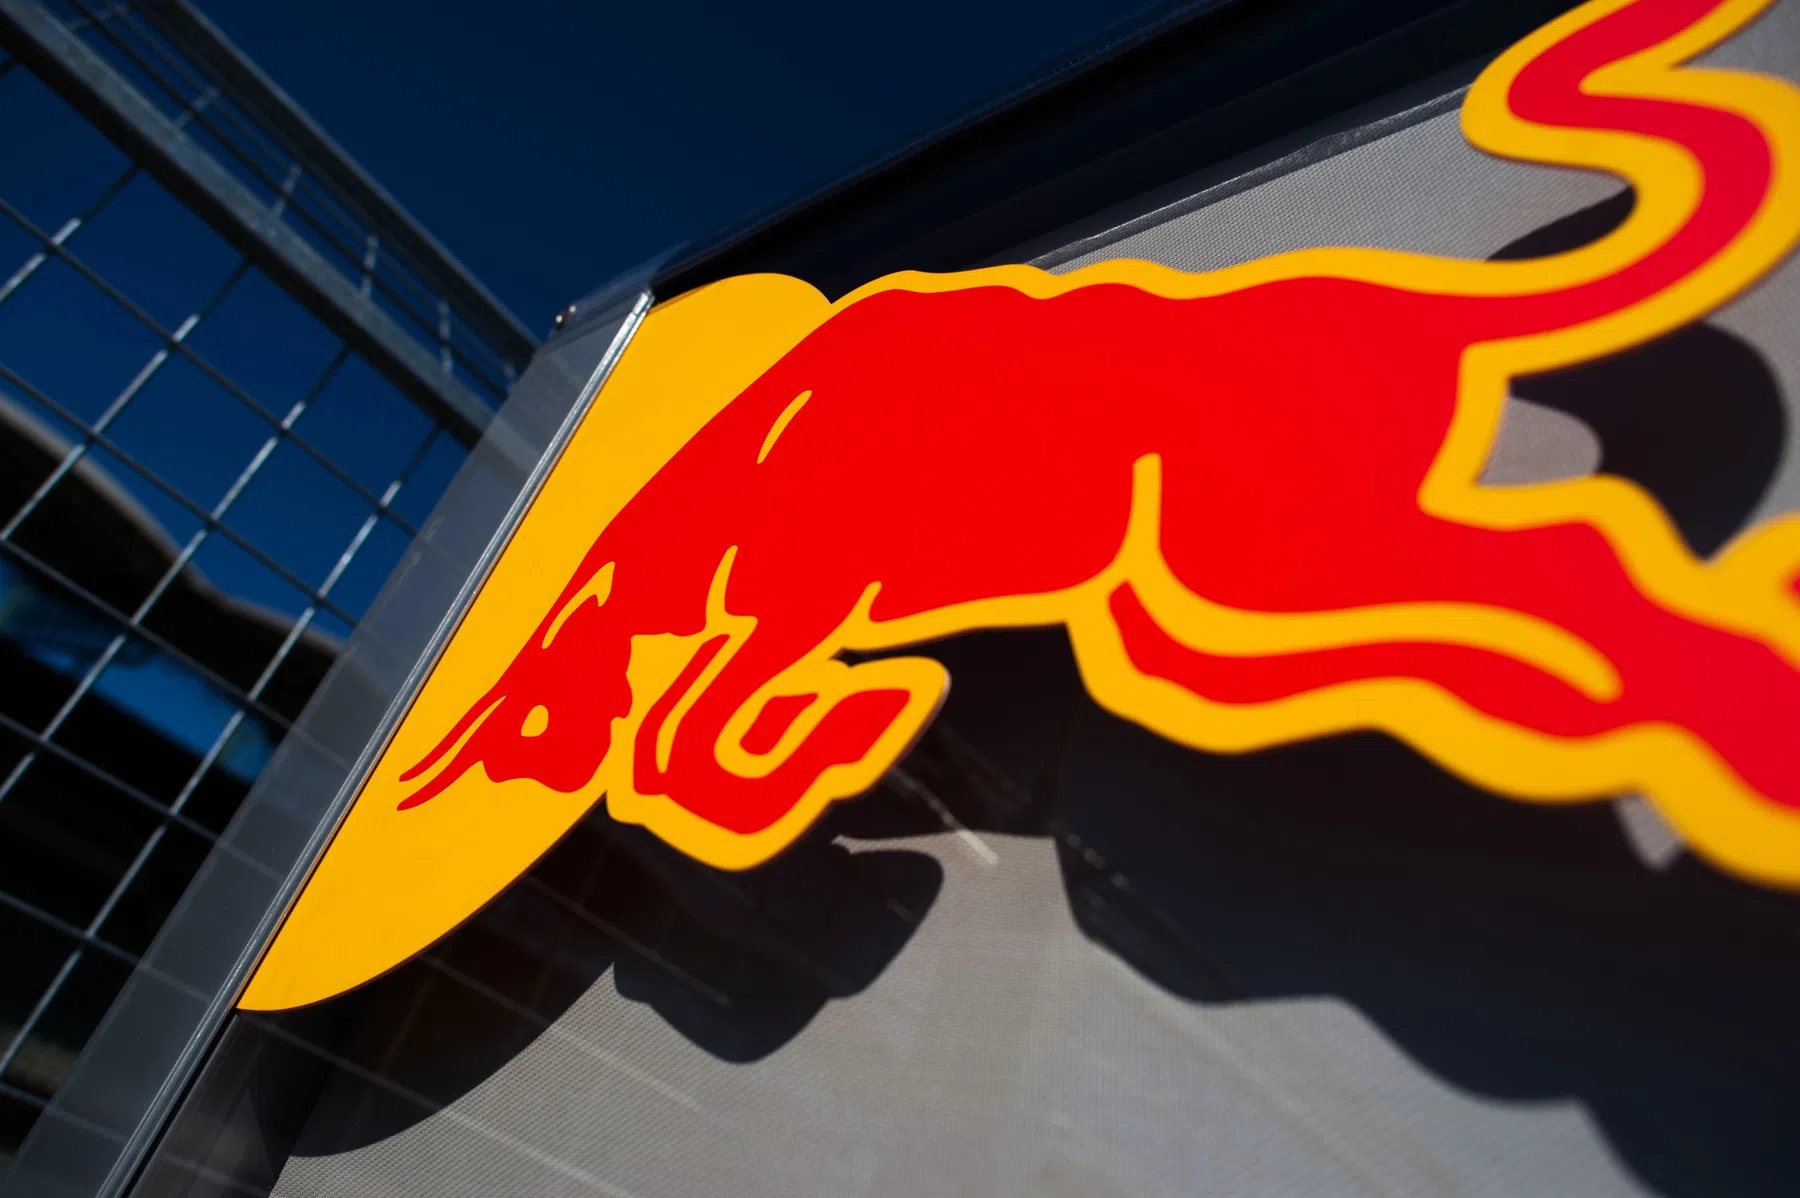 Red Bull hints at big news later today